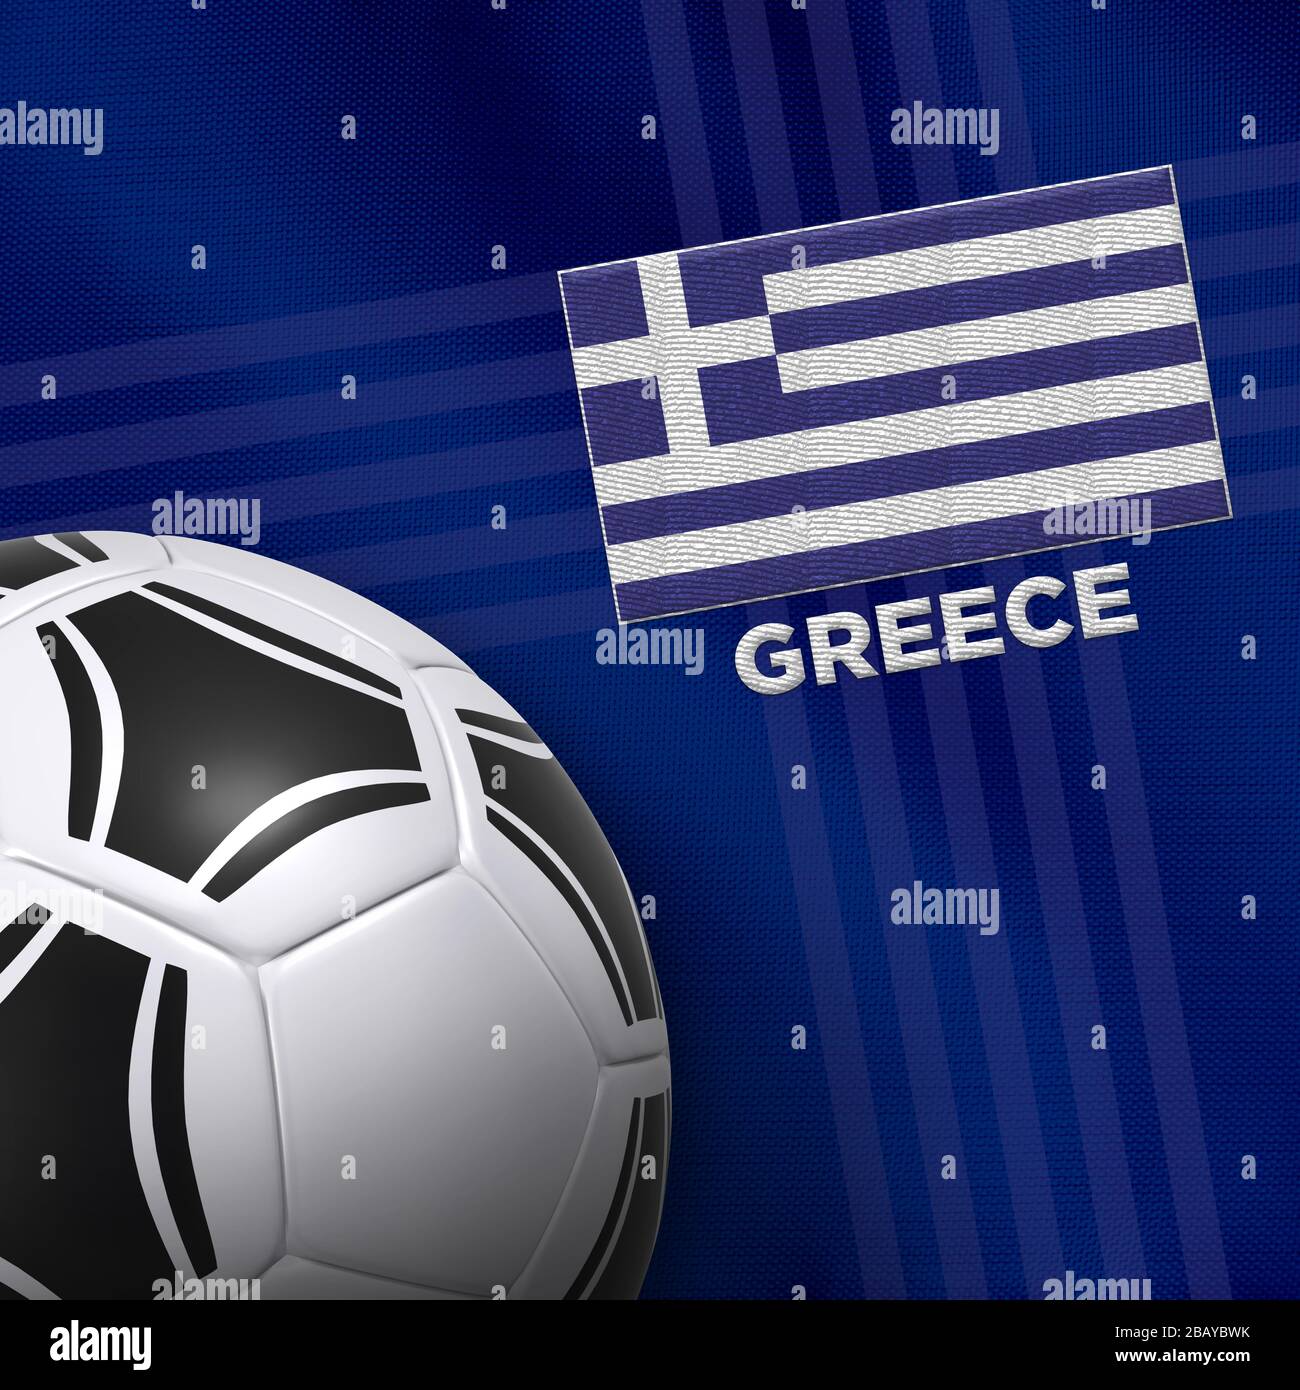 Football (soccer) ball and national team jersey of Greece. Stock Photo